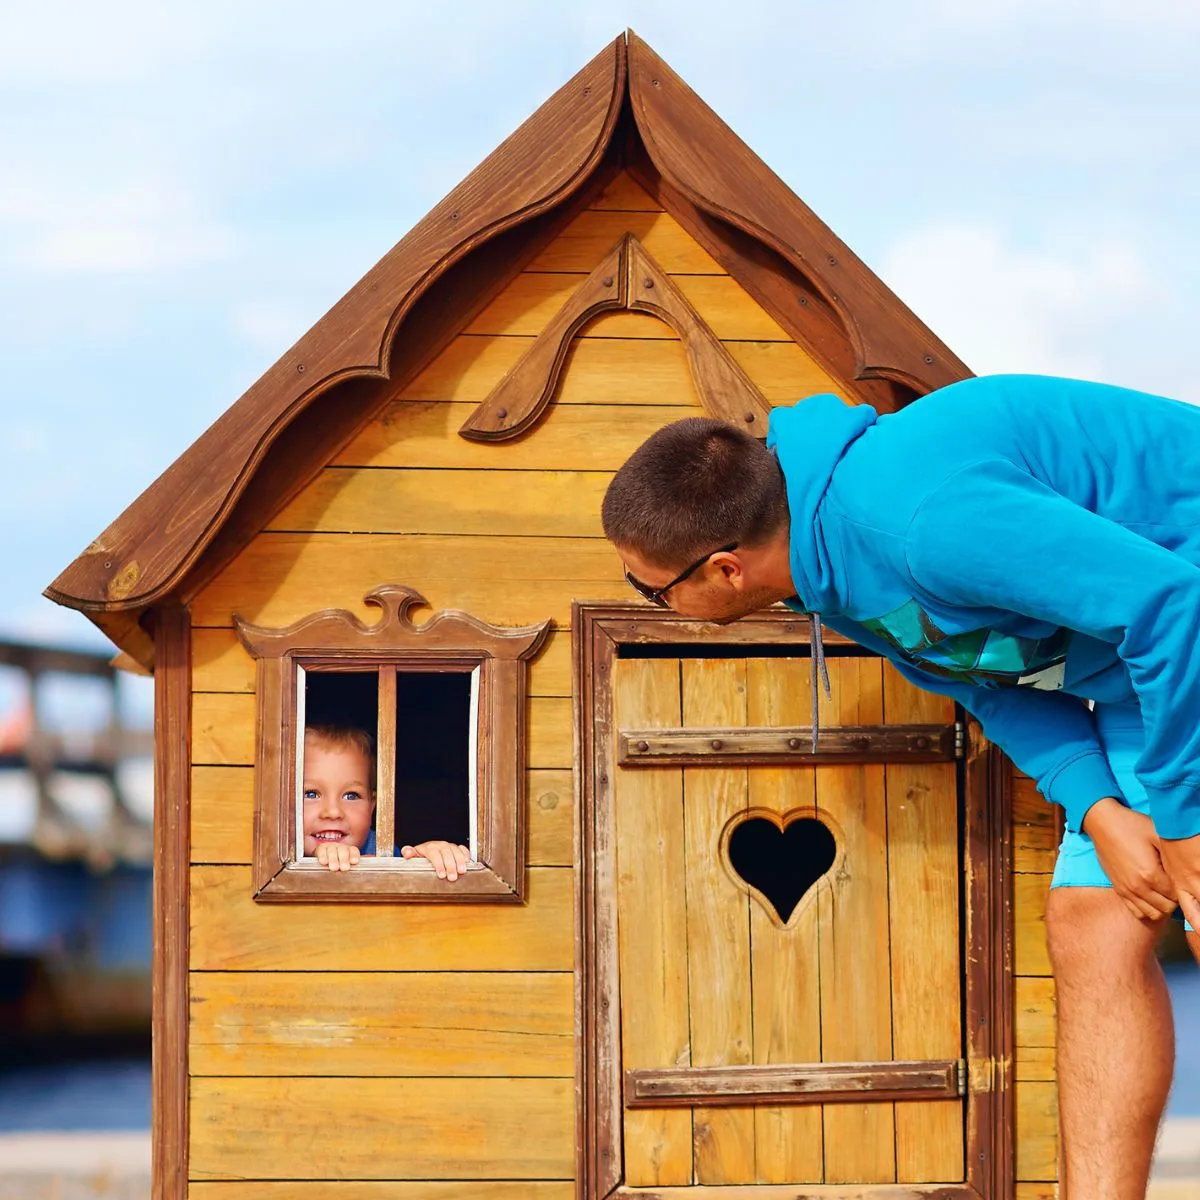 Man playing with kid inside smal wooden shed playhouse. 